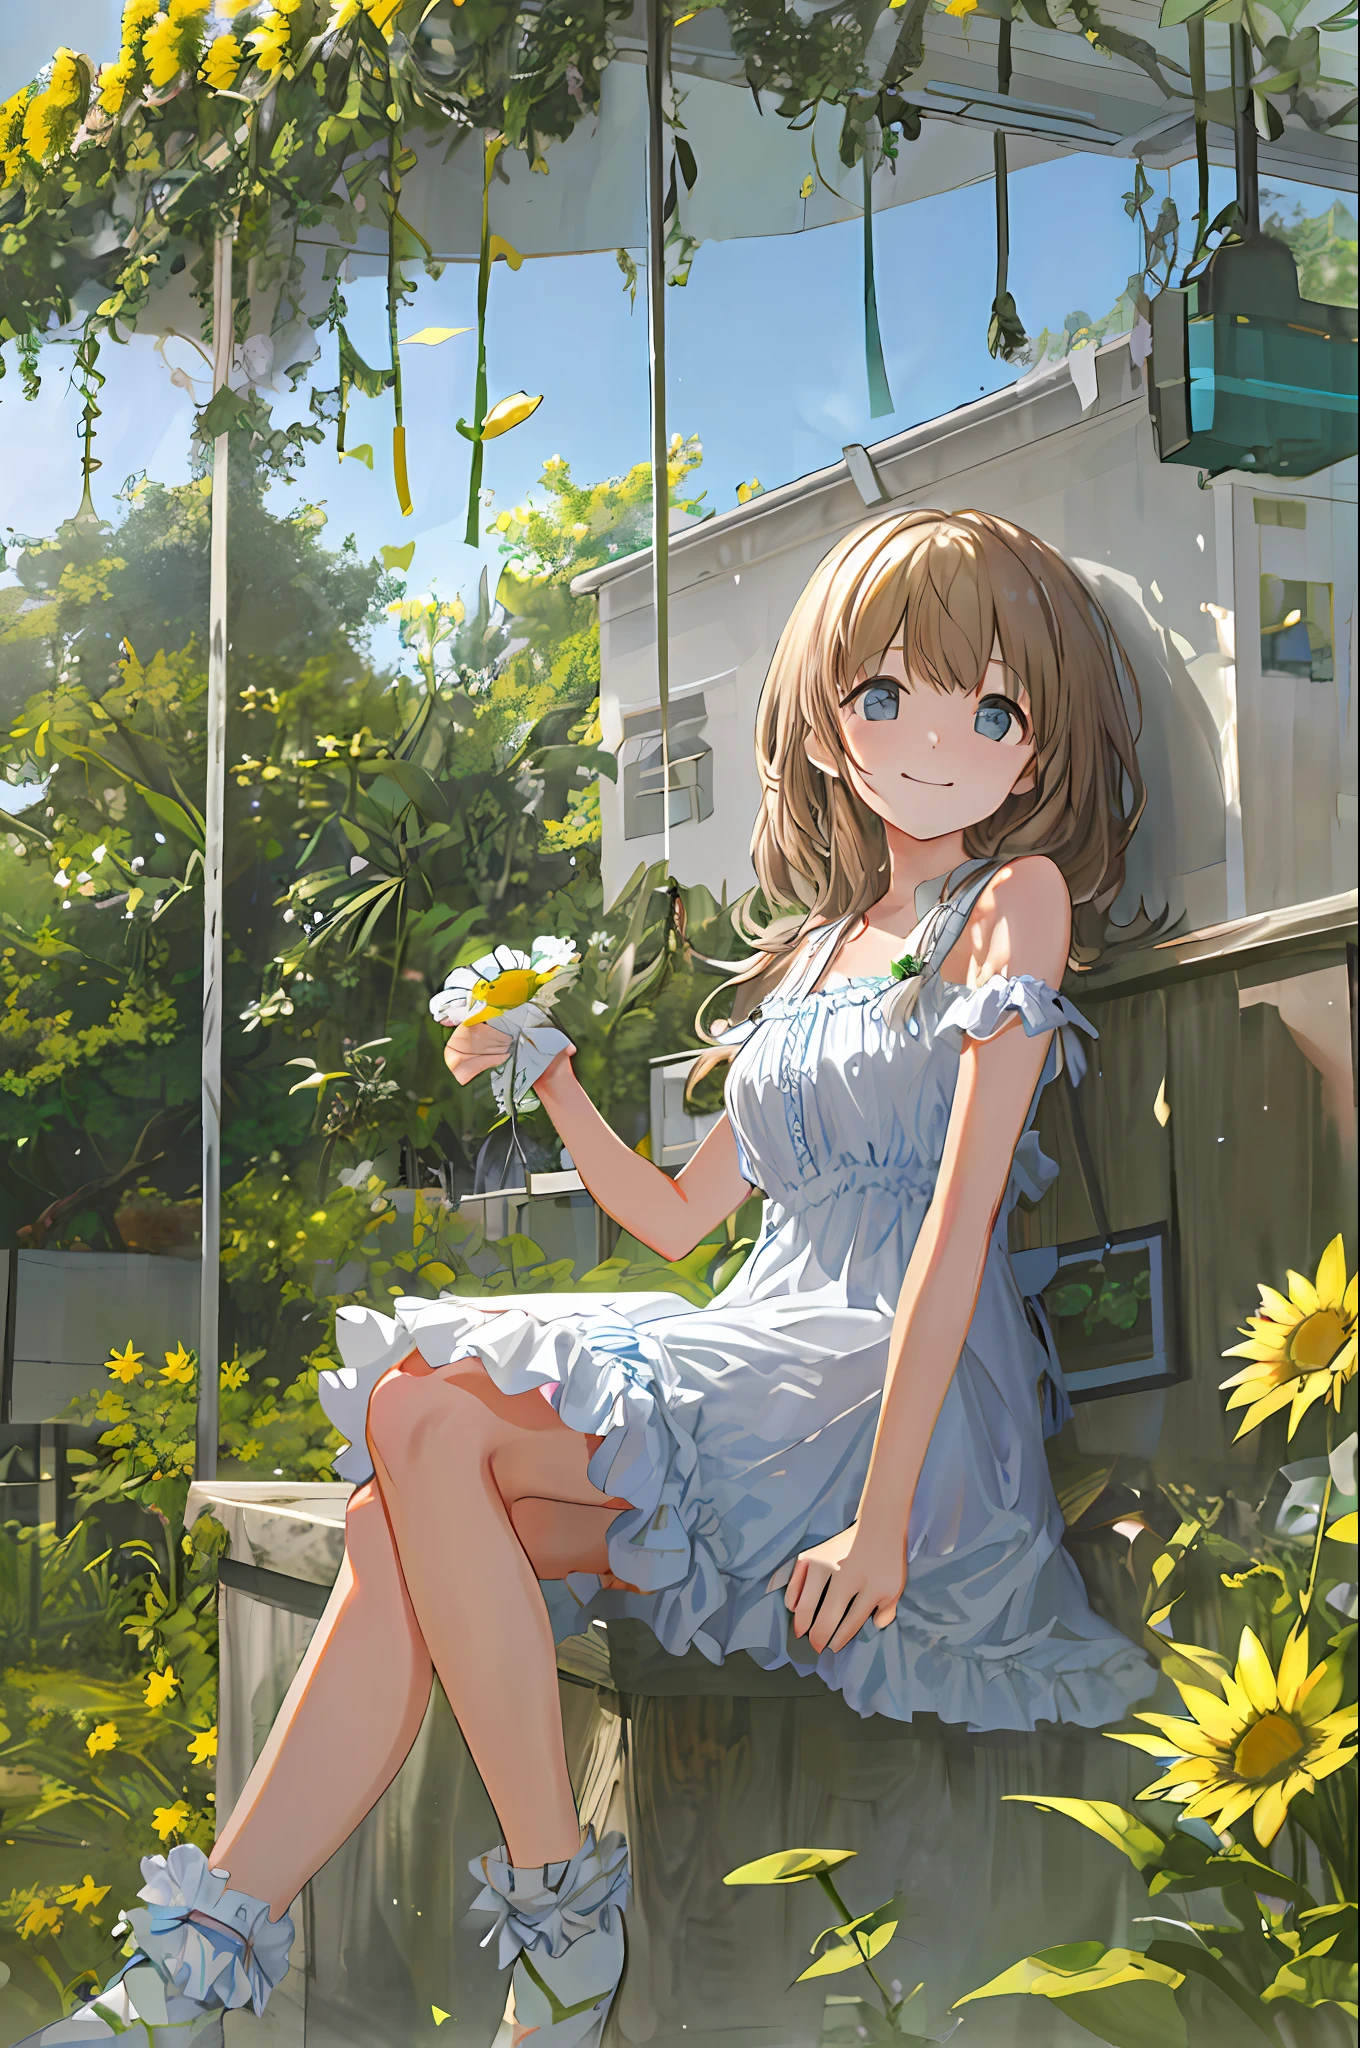 Masterpiece-grade CG, best image quality and detail, photo-level realism (1.4). (1girl), wearing a white dress, slightly exposed shoulders, delicate and shiny skin, smiling, in the garden, surrounded by yellow daisies, slightly raised head to look up at the bright sky, the picture adopts artistic thick painting style, softer luminosity, 4K HD wallpaper, better volumetric cloud effect.